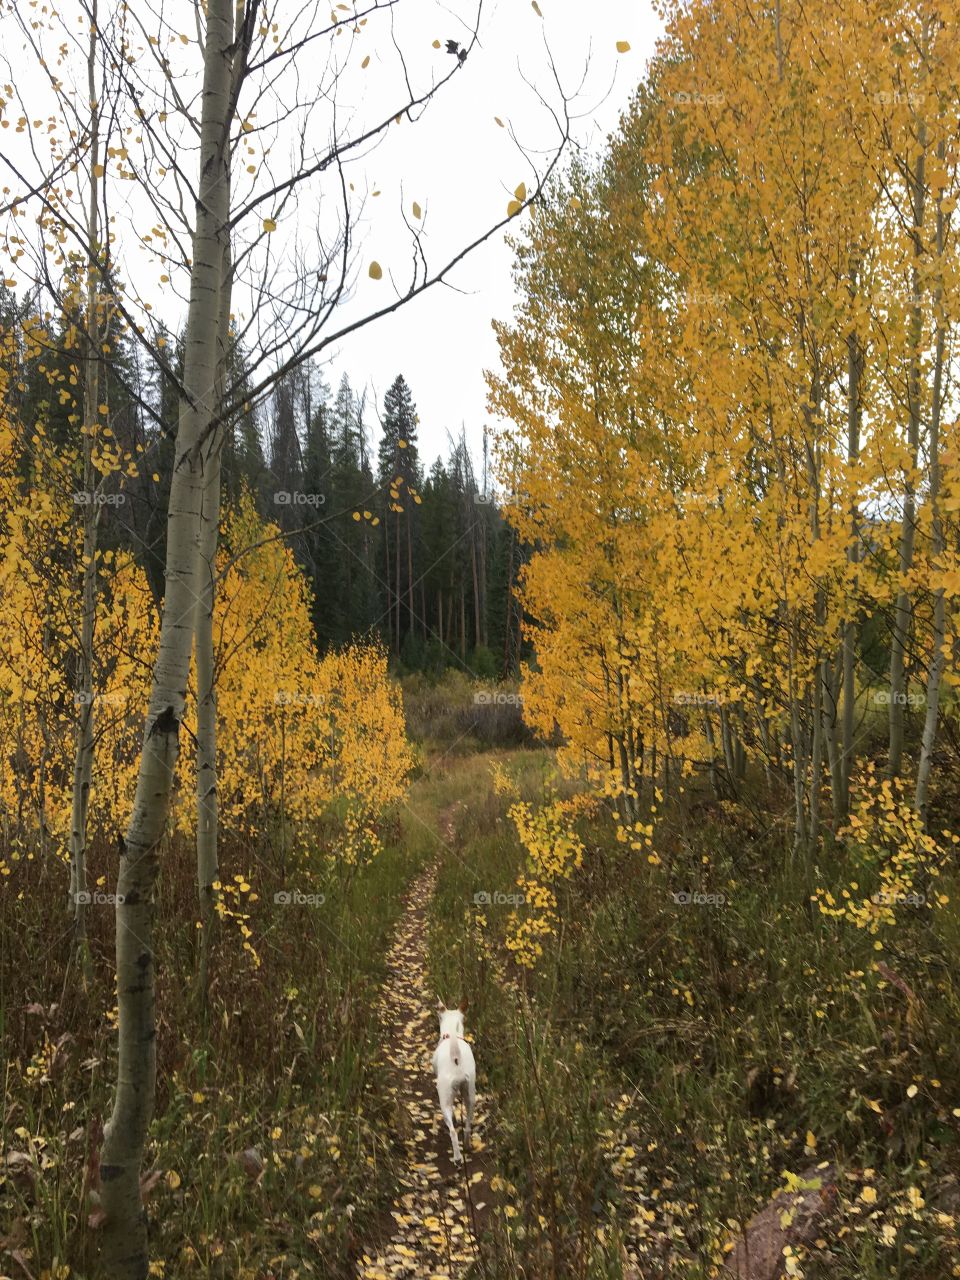 Fall colors in Vail, Colorado